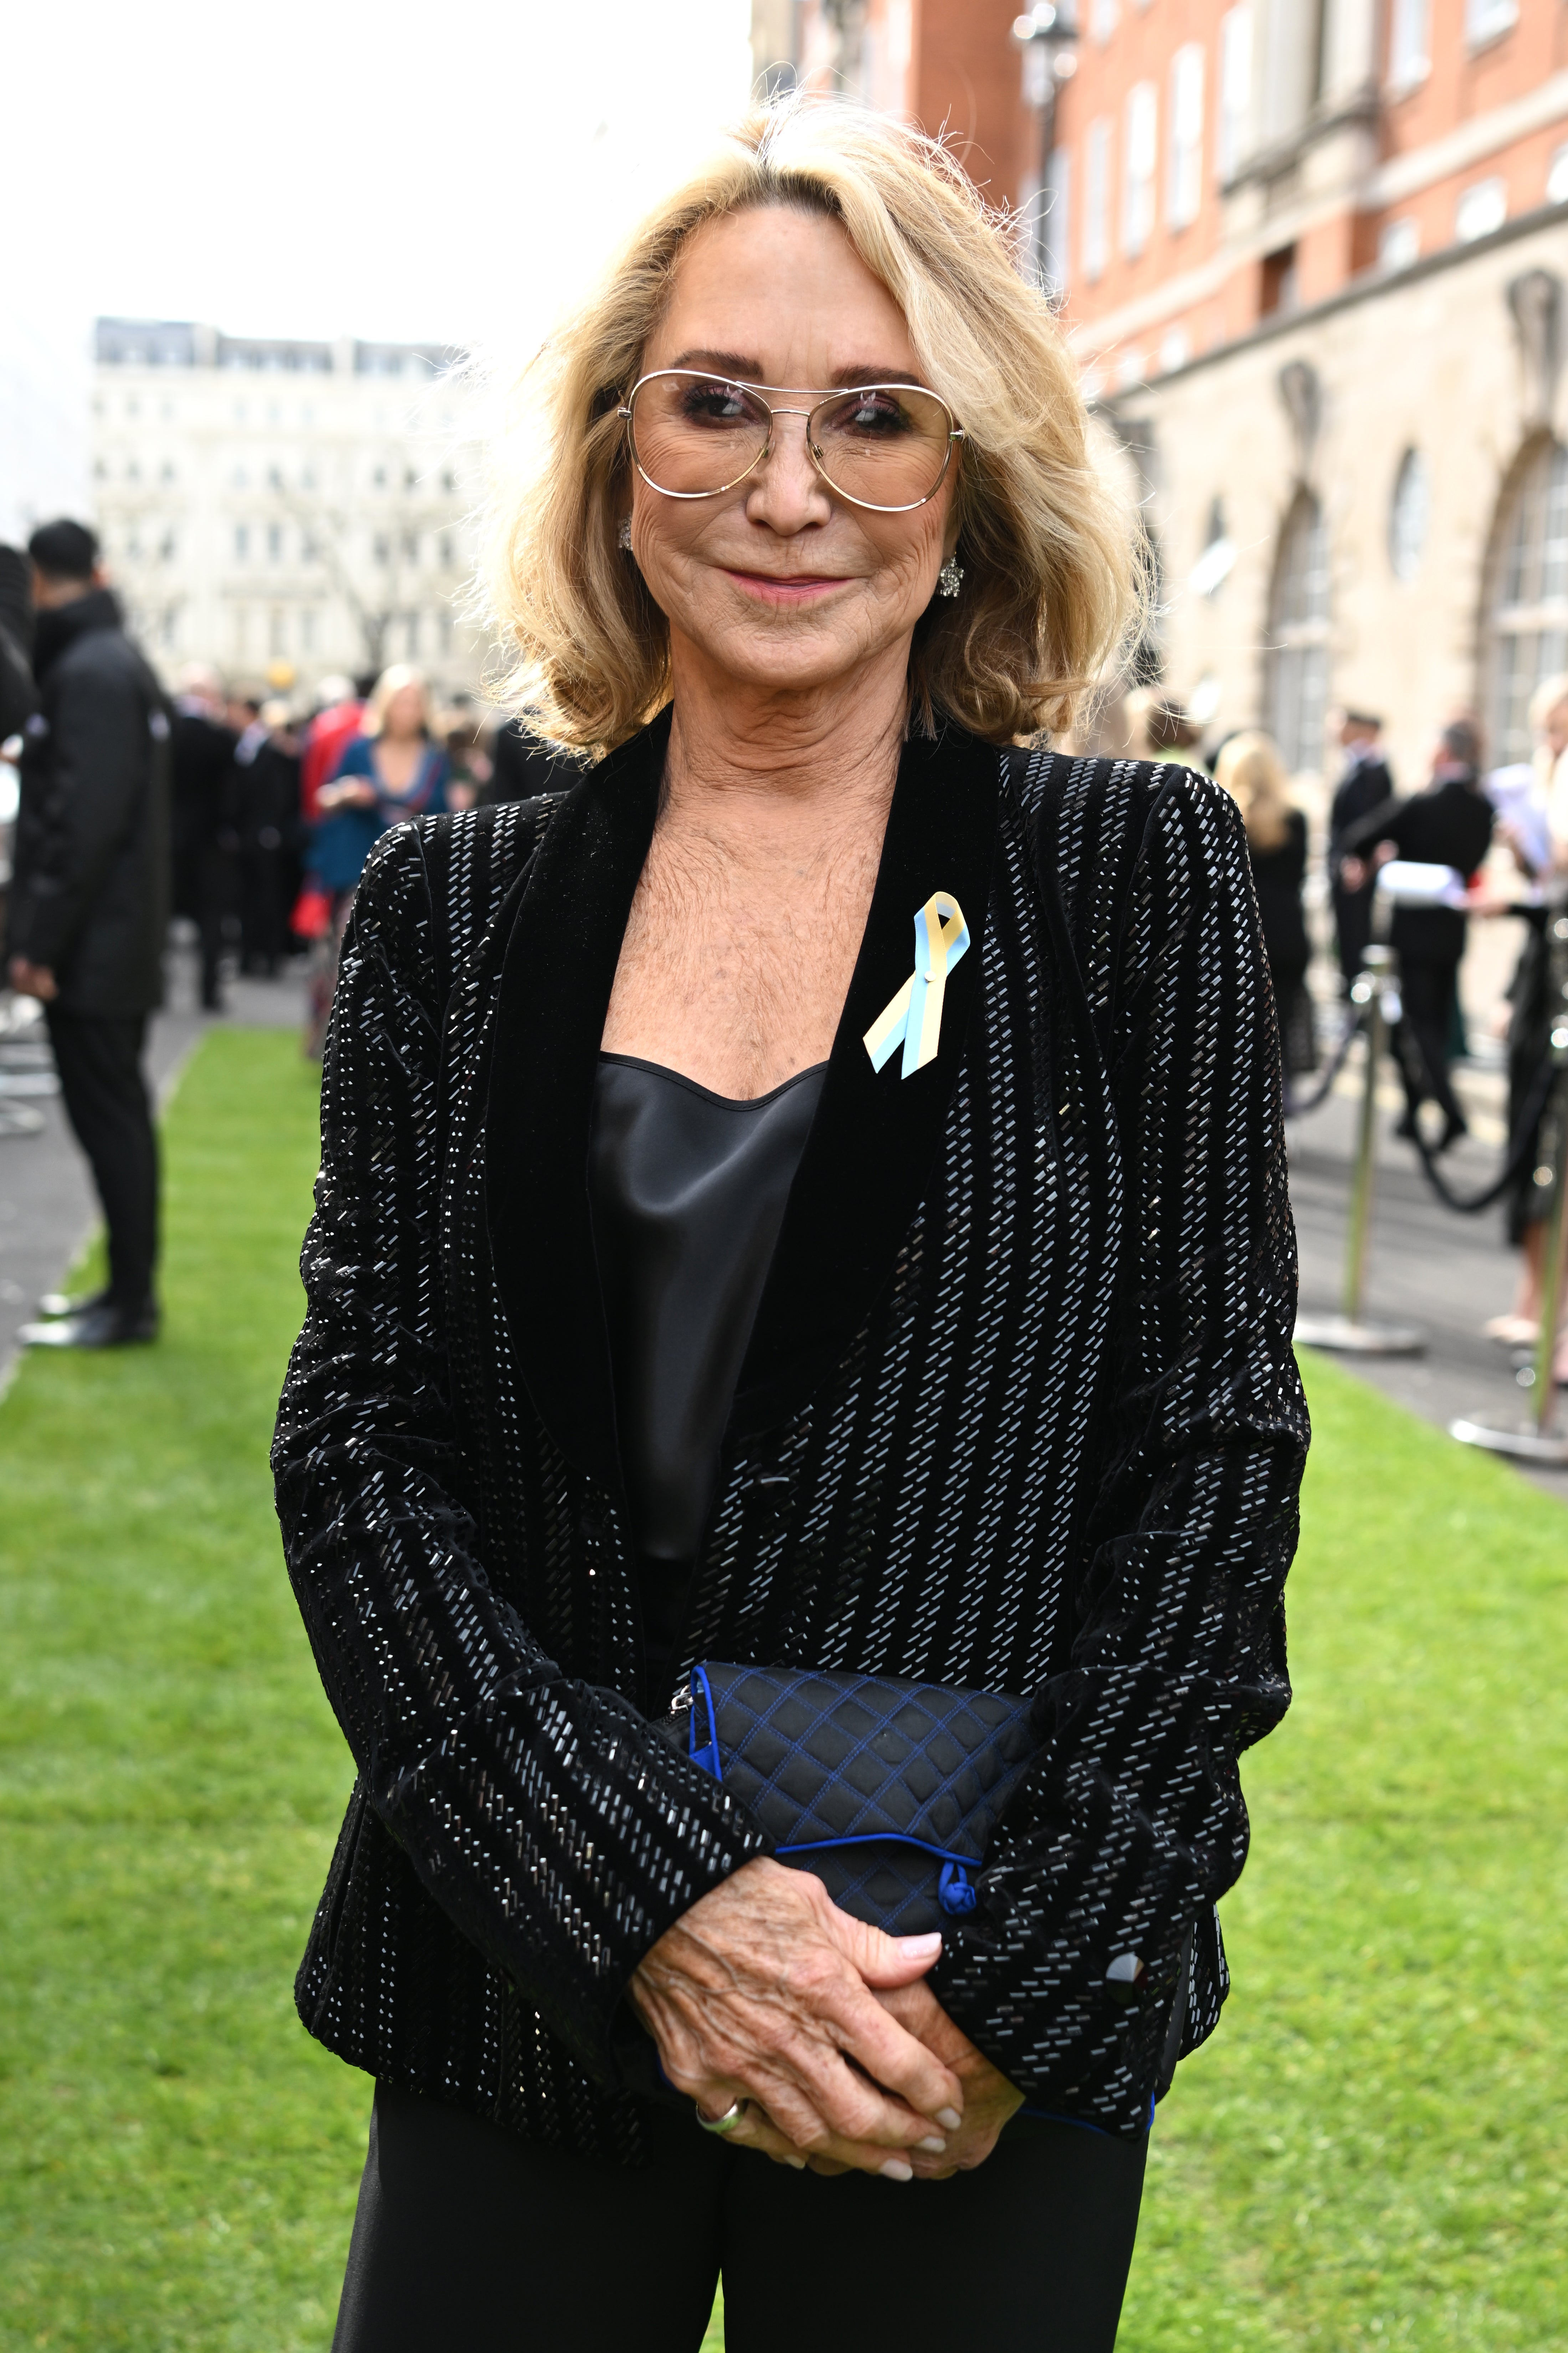 Felicity Kendal attends The Olivier Awards 2022 with MasterCard at the Royal Albert Hall on April 10, 2022